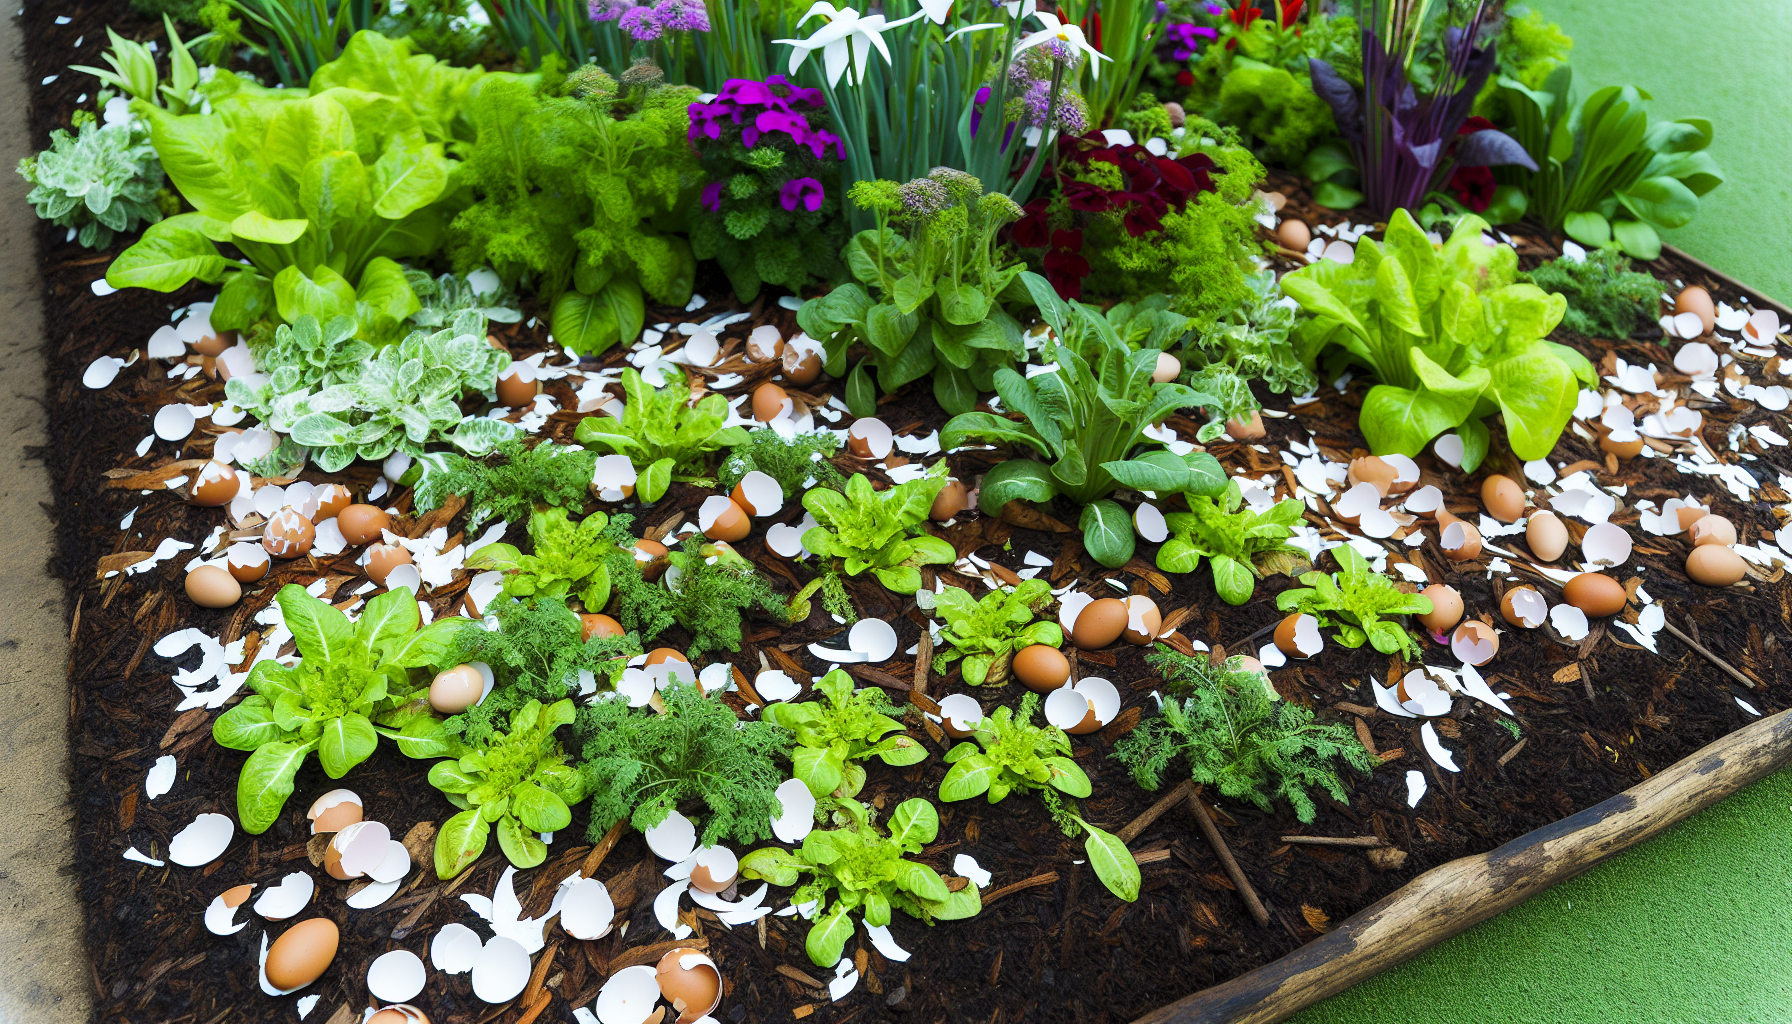 Eggshells scattered as natural fertilizer and mulch in a garden